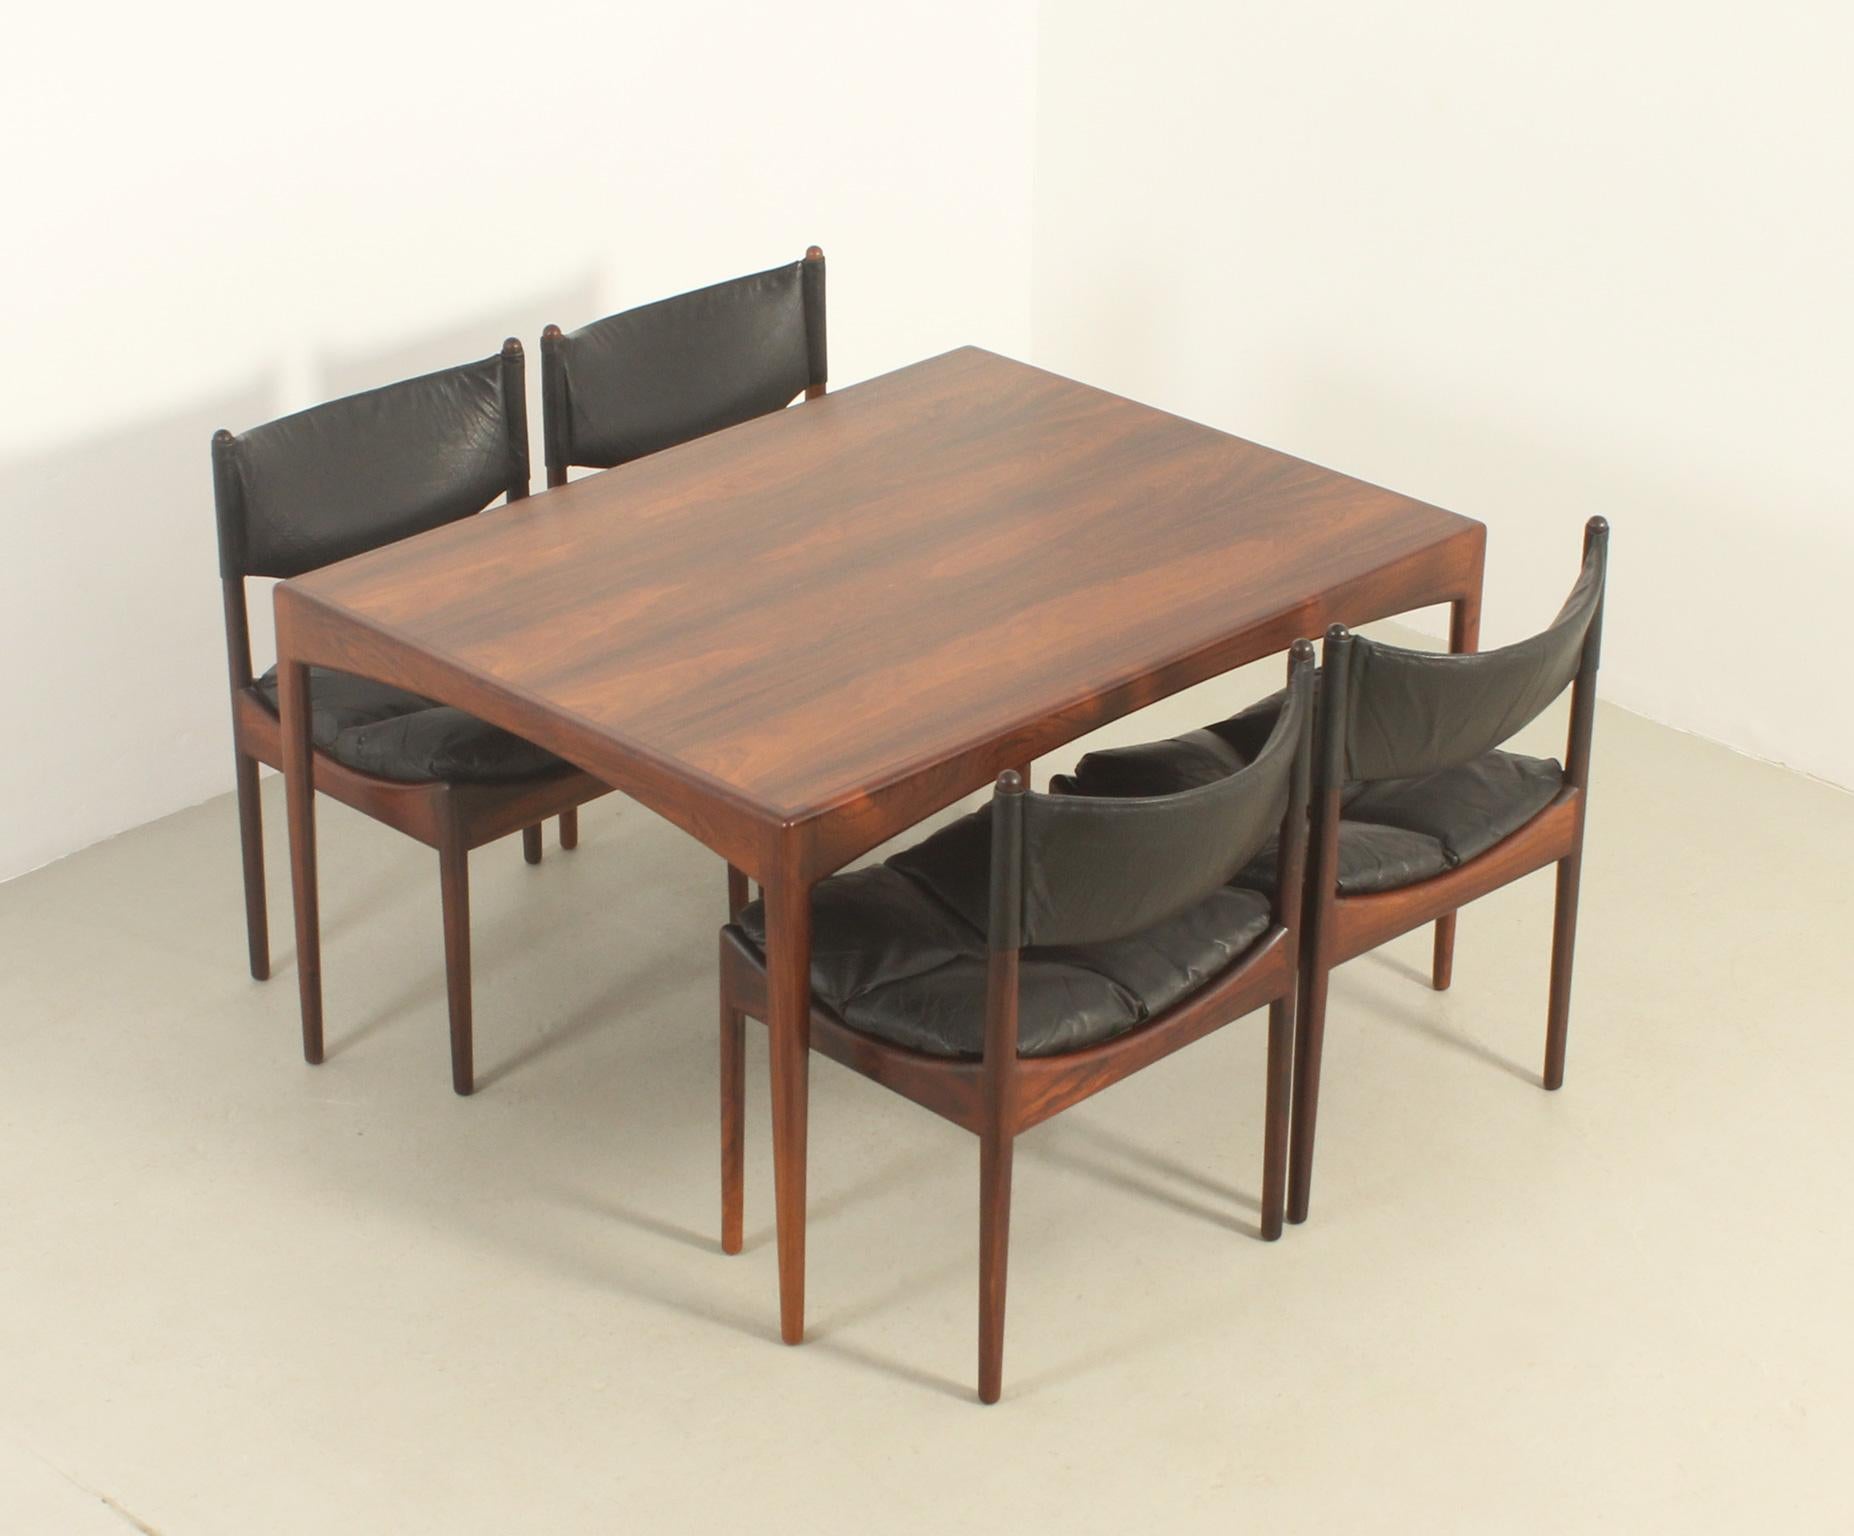 Modus dining set designed in 1961 by Kristian Vedel for Søren Willadsen, Denmark. Hardwood with stunning wood grain and original black leather upholstery. The set consists of a rectangular dining table and four side chairs. 